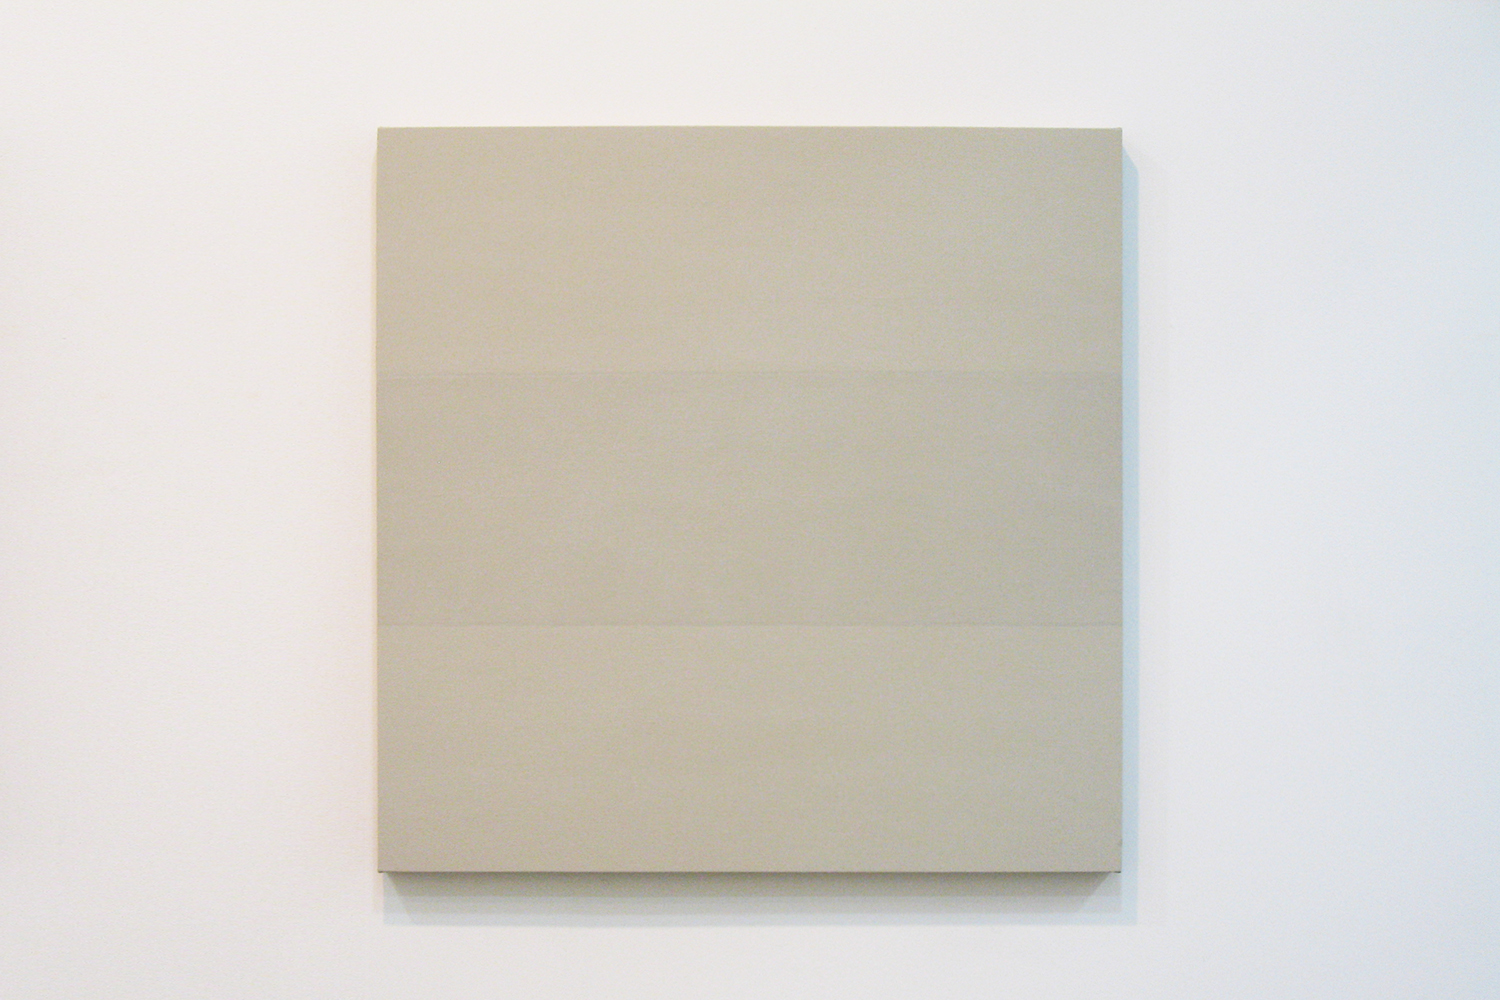 TS0823｜Gesso on linen on panel｜60 x 60 cm｜2008